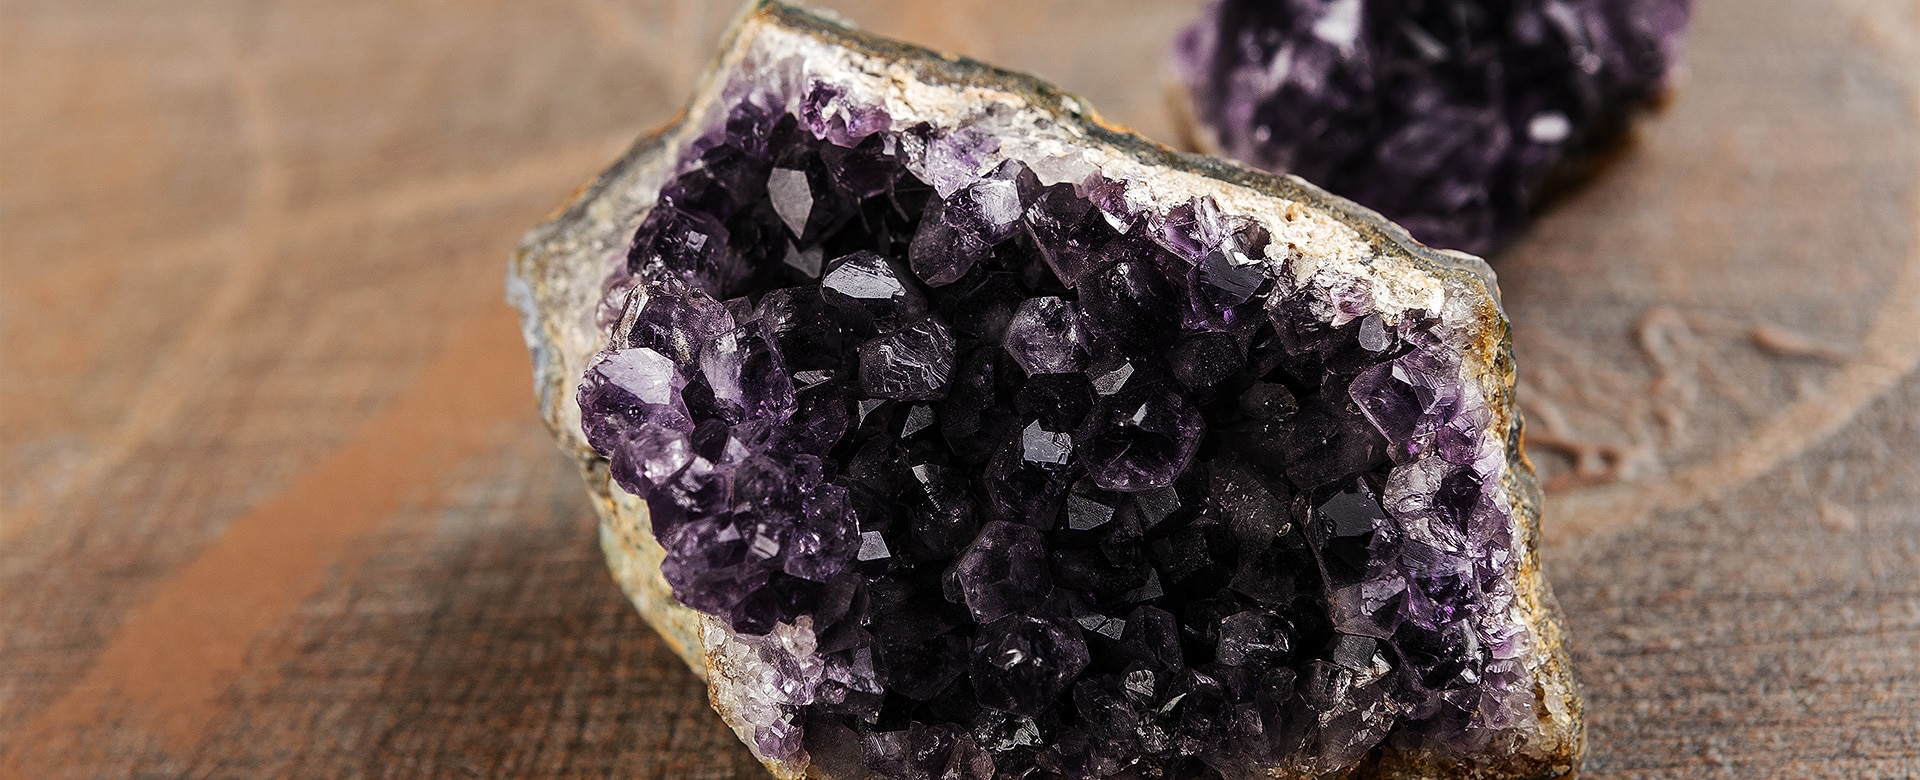 Black Amethyst Meaning and Properties 1